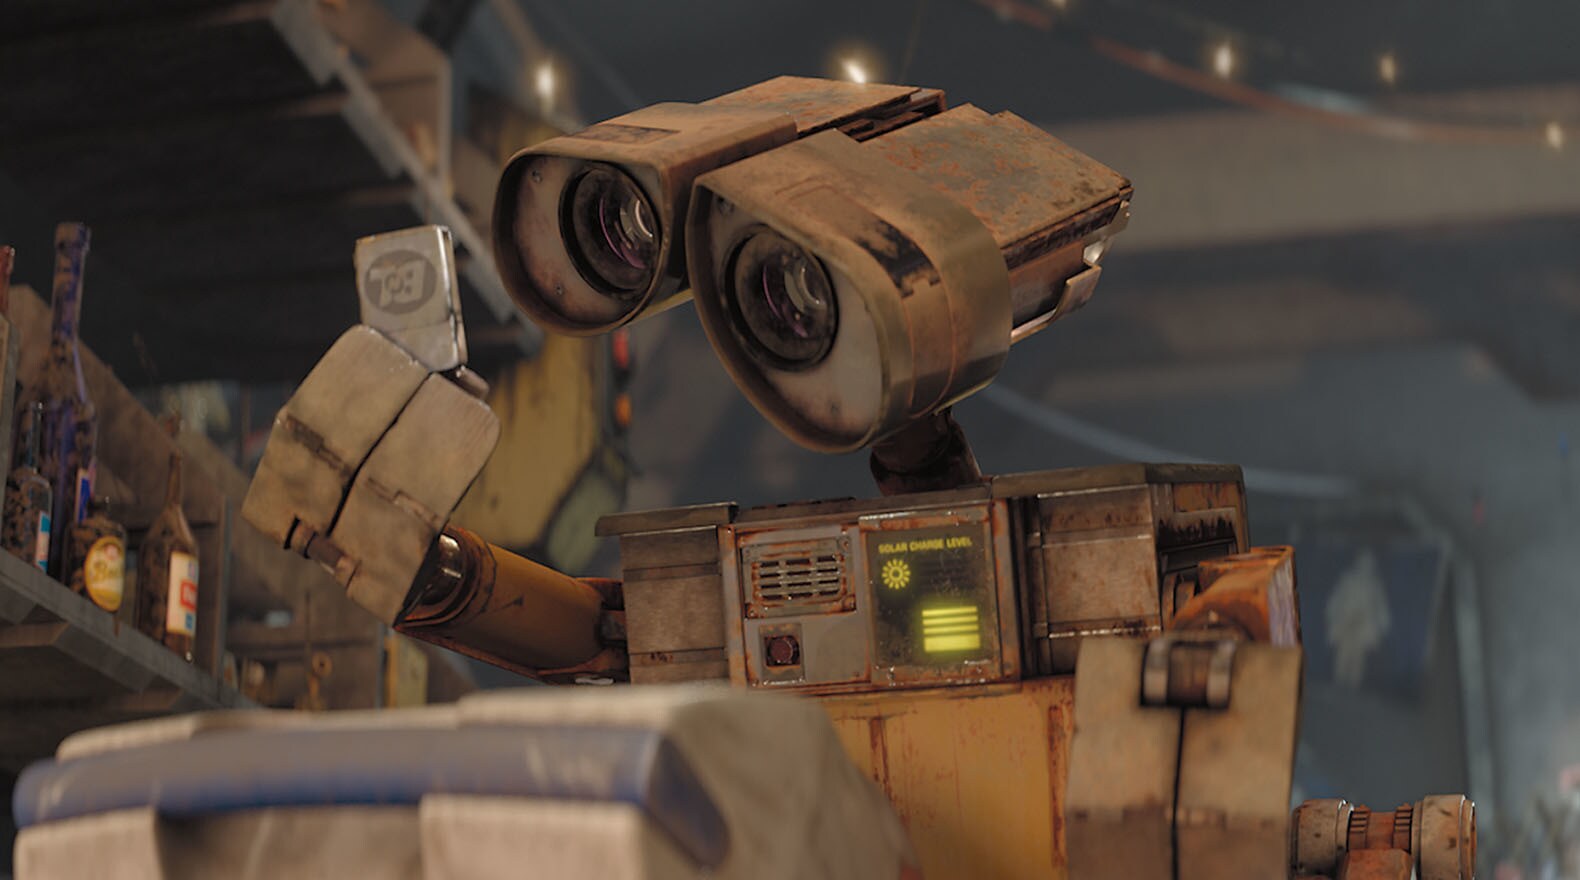 WALL•E tries to understand what the world was like long ago. From the movie "Wall-E"